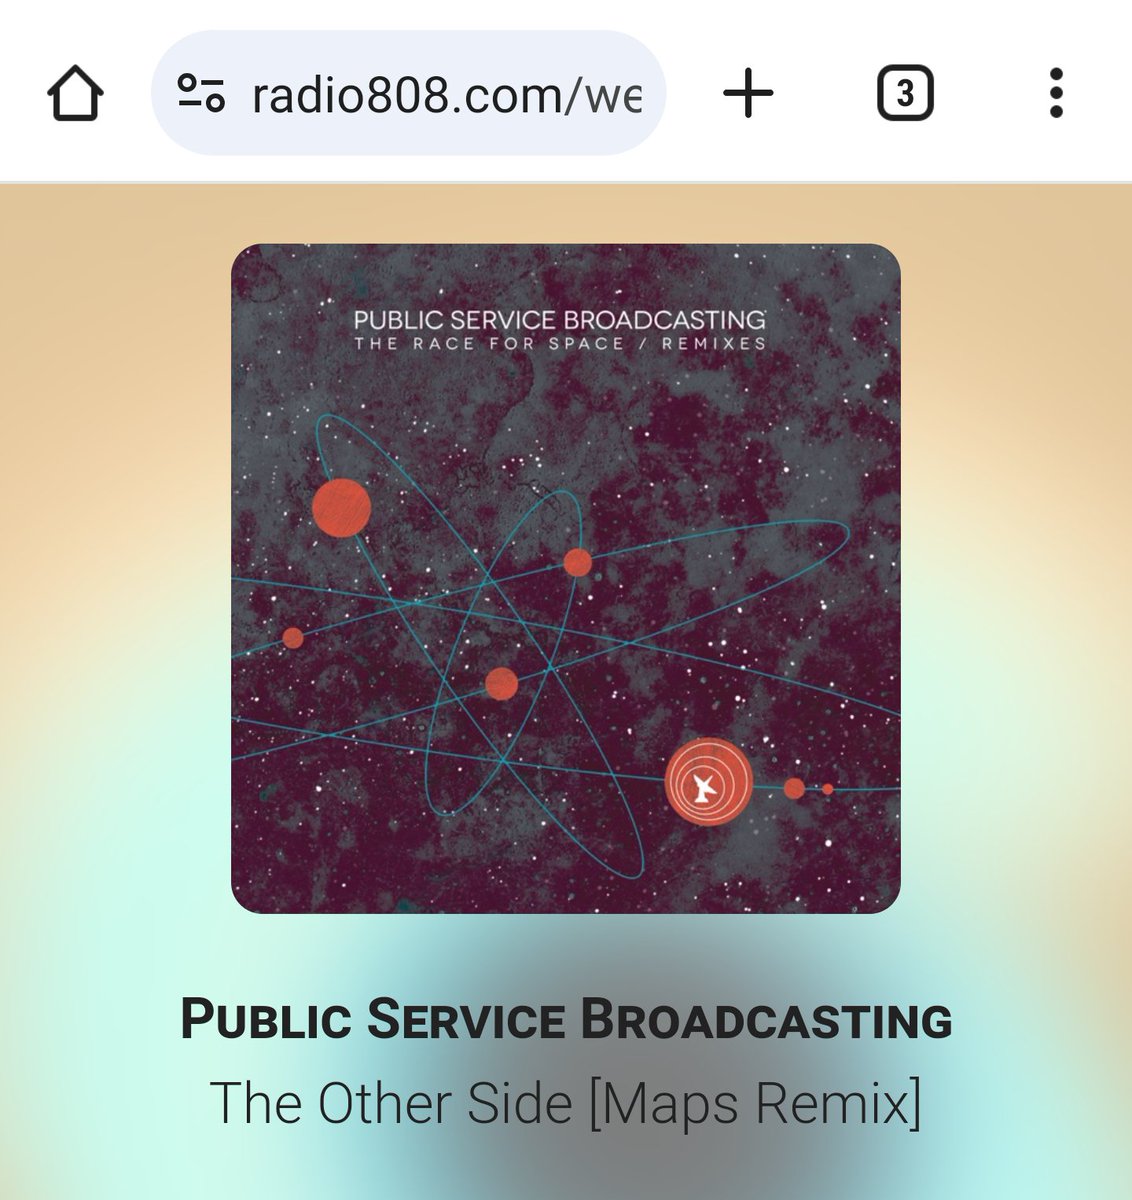 Tune in to #PublicServiceBroadcasting - The Other Side [Maps Remix] on #awesome Radio 808! radio808.com/web-player/